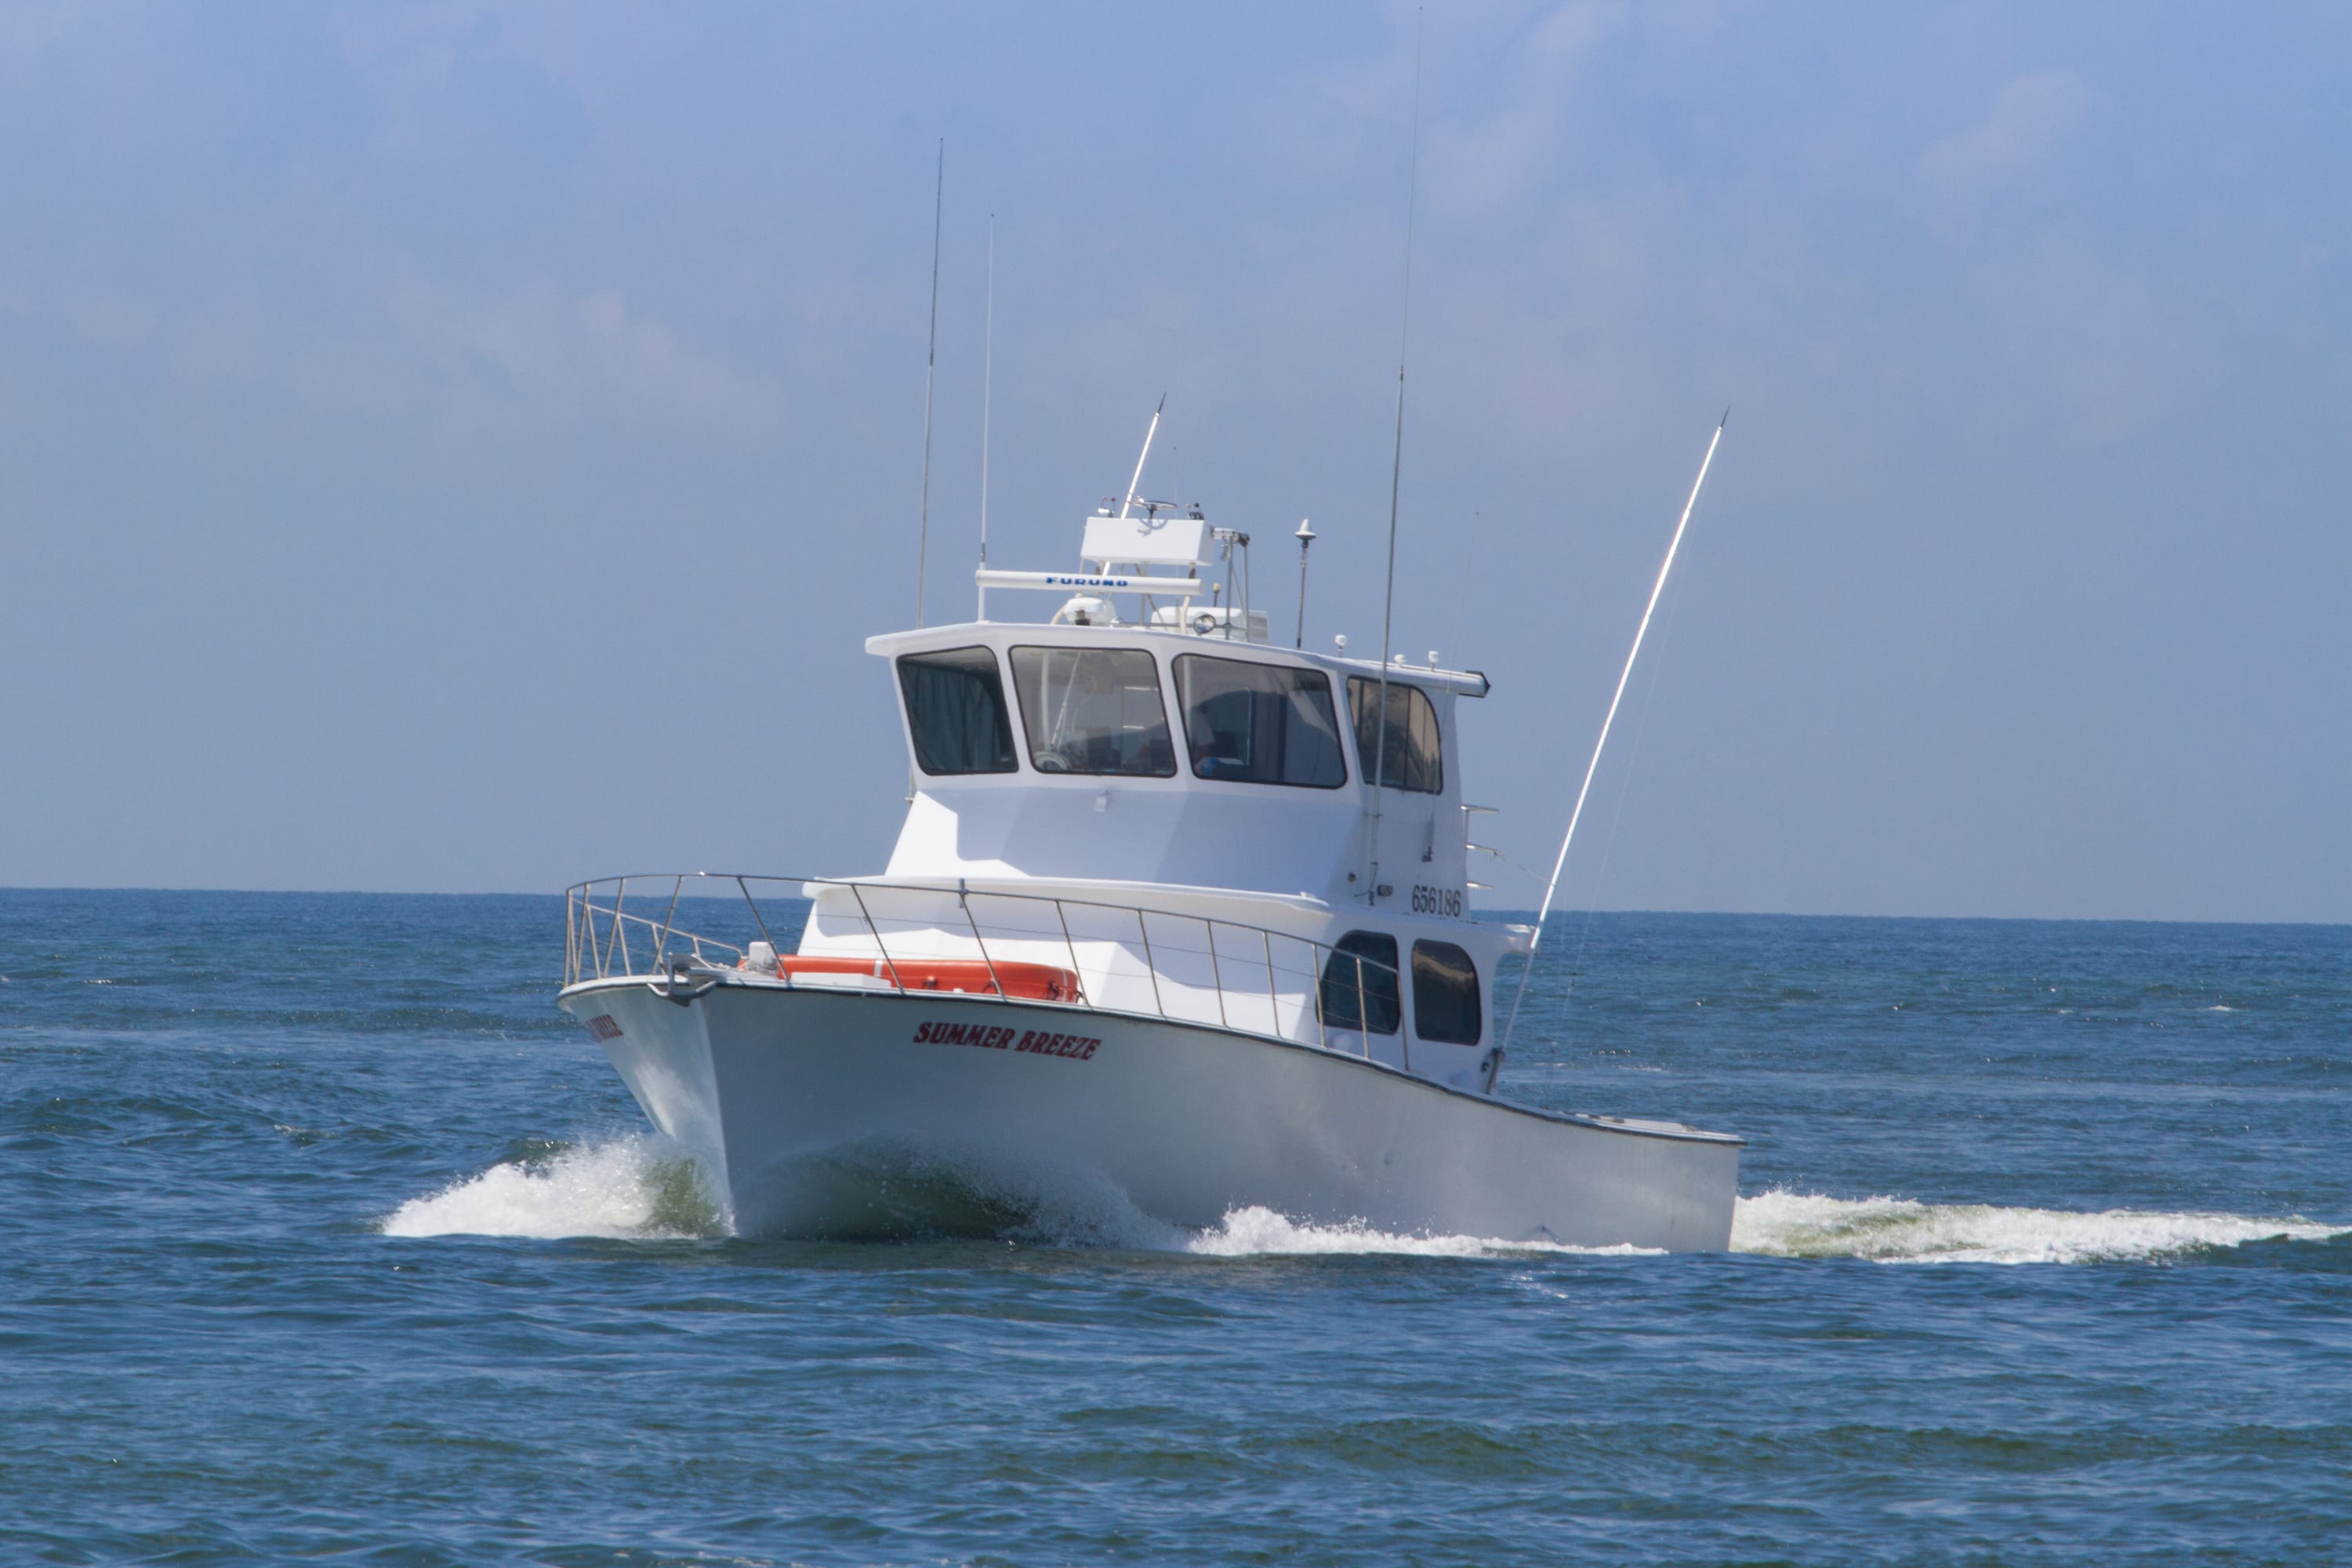 The Summer Breeze - One of our charter fishing boats located in Orange Beach, AL.